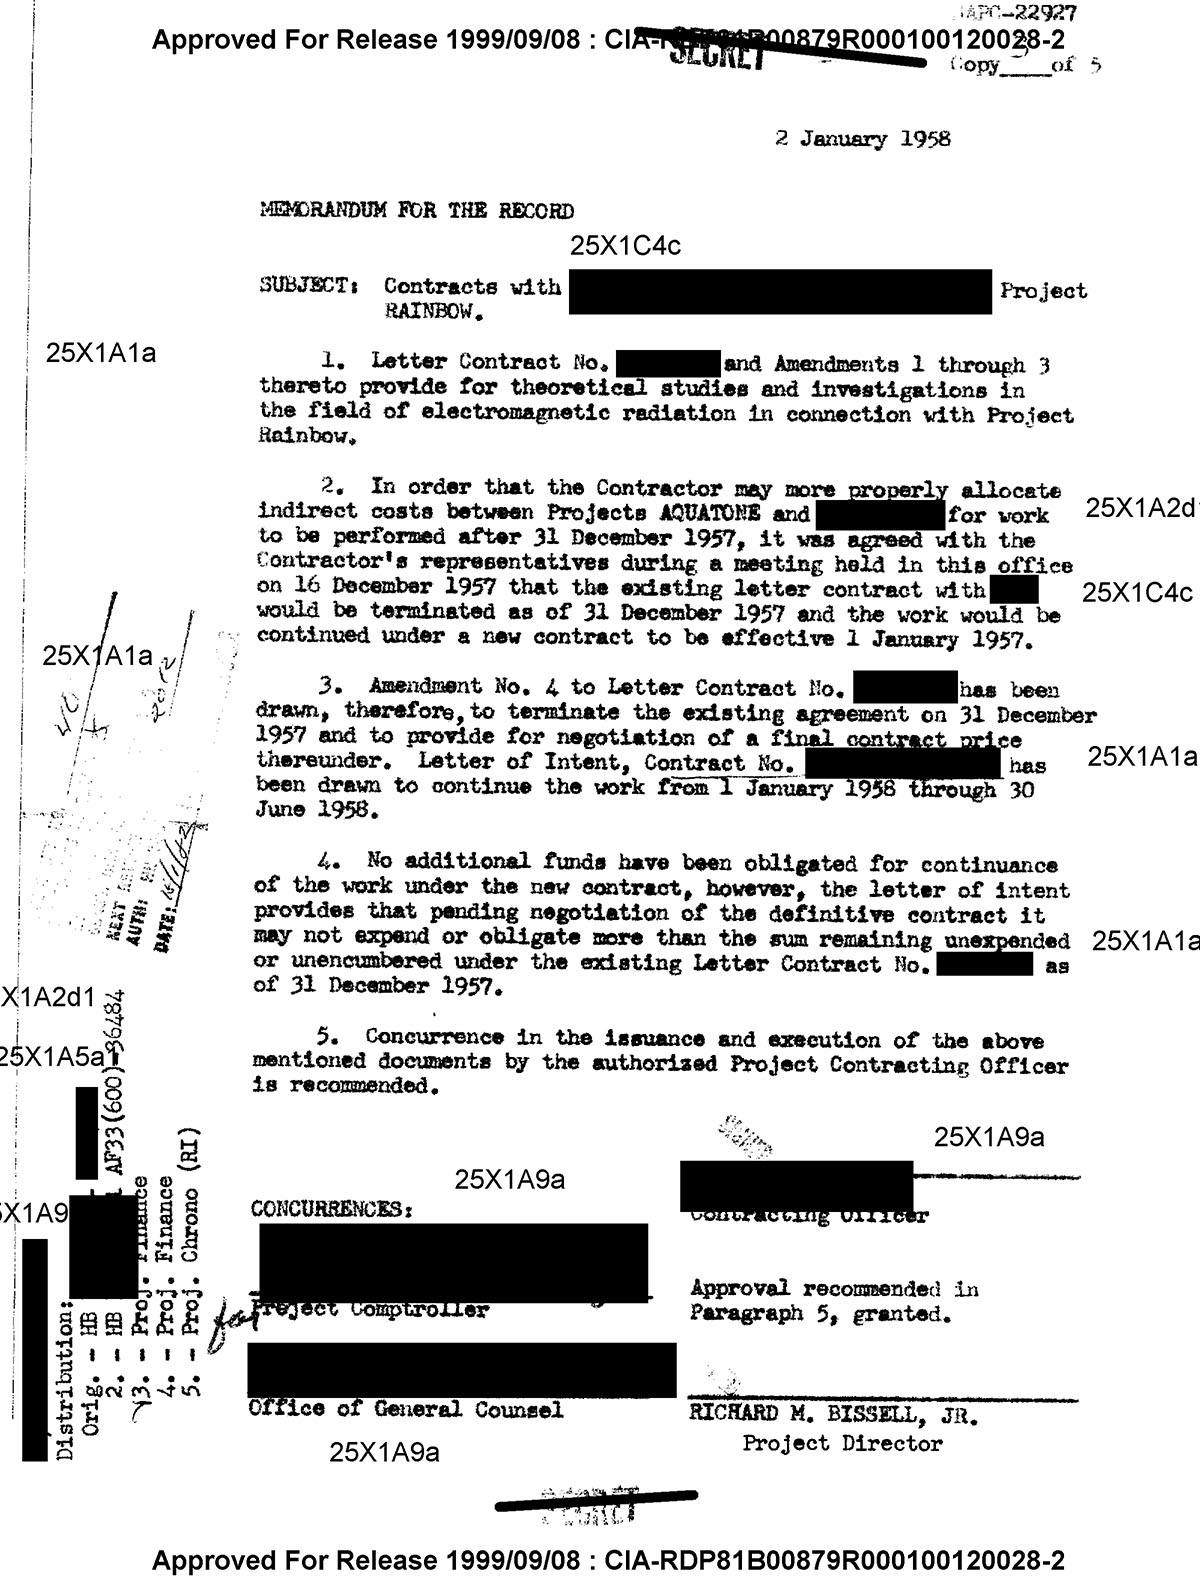 CIA Contract With (Classified), Project Rainbow, Jan 2nd, 1958